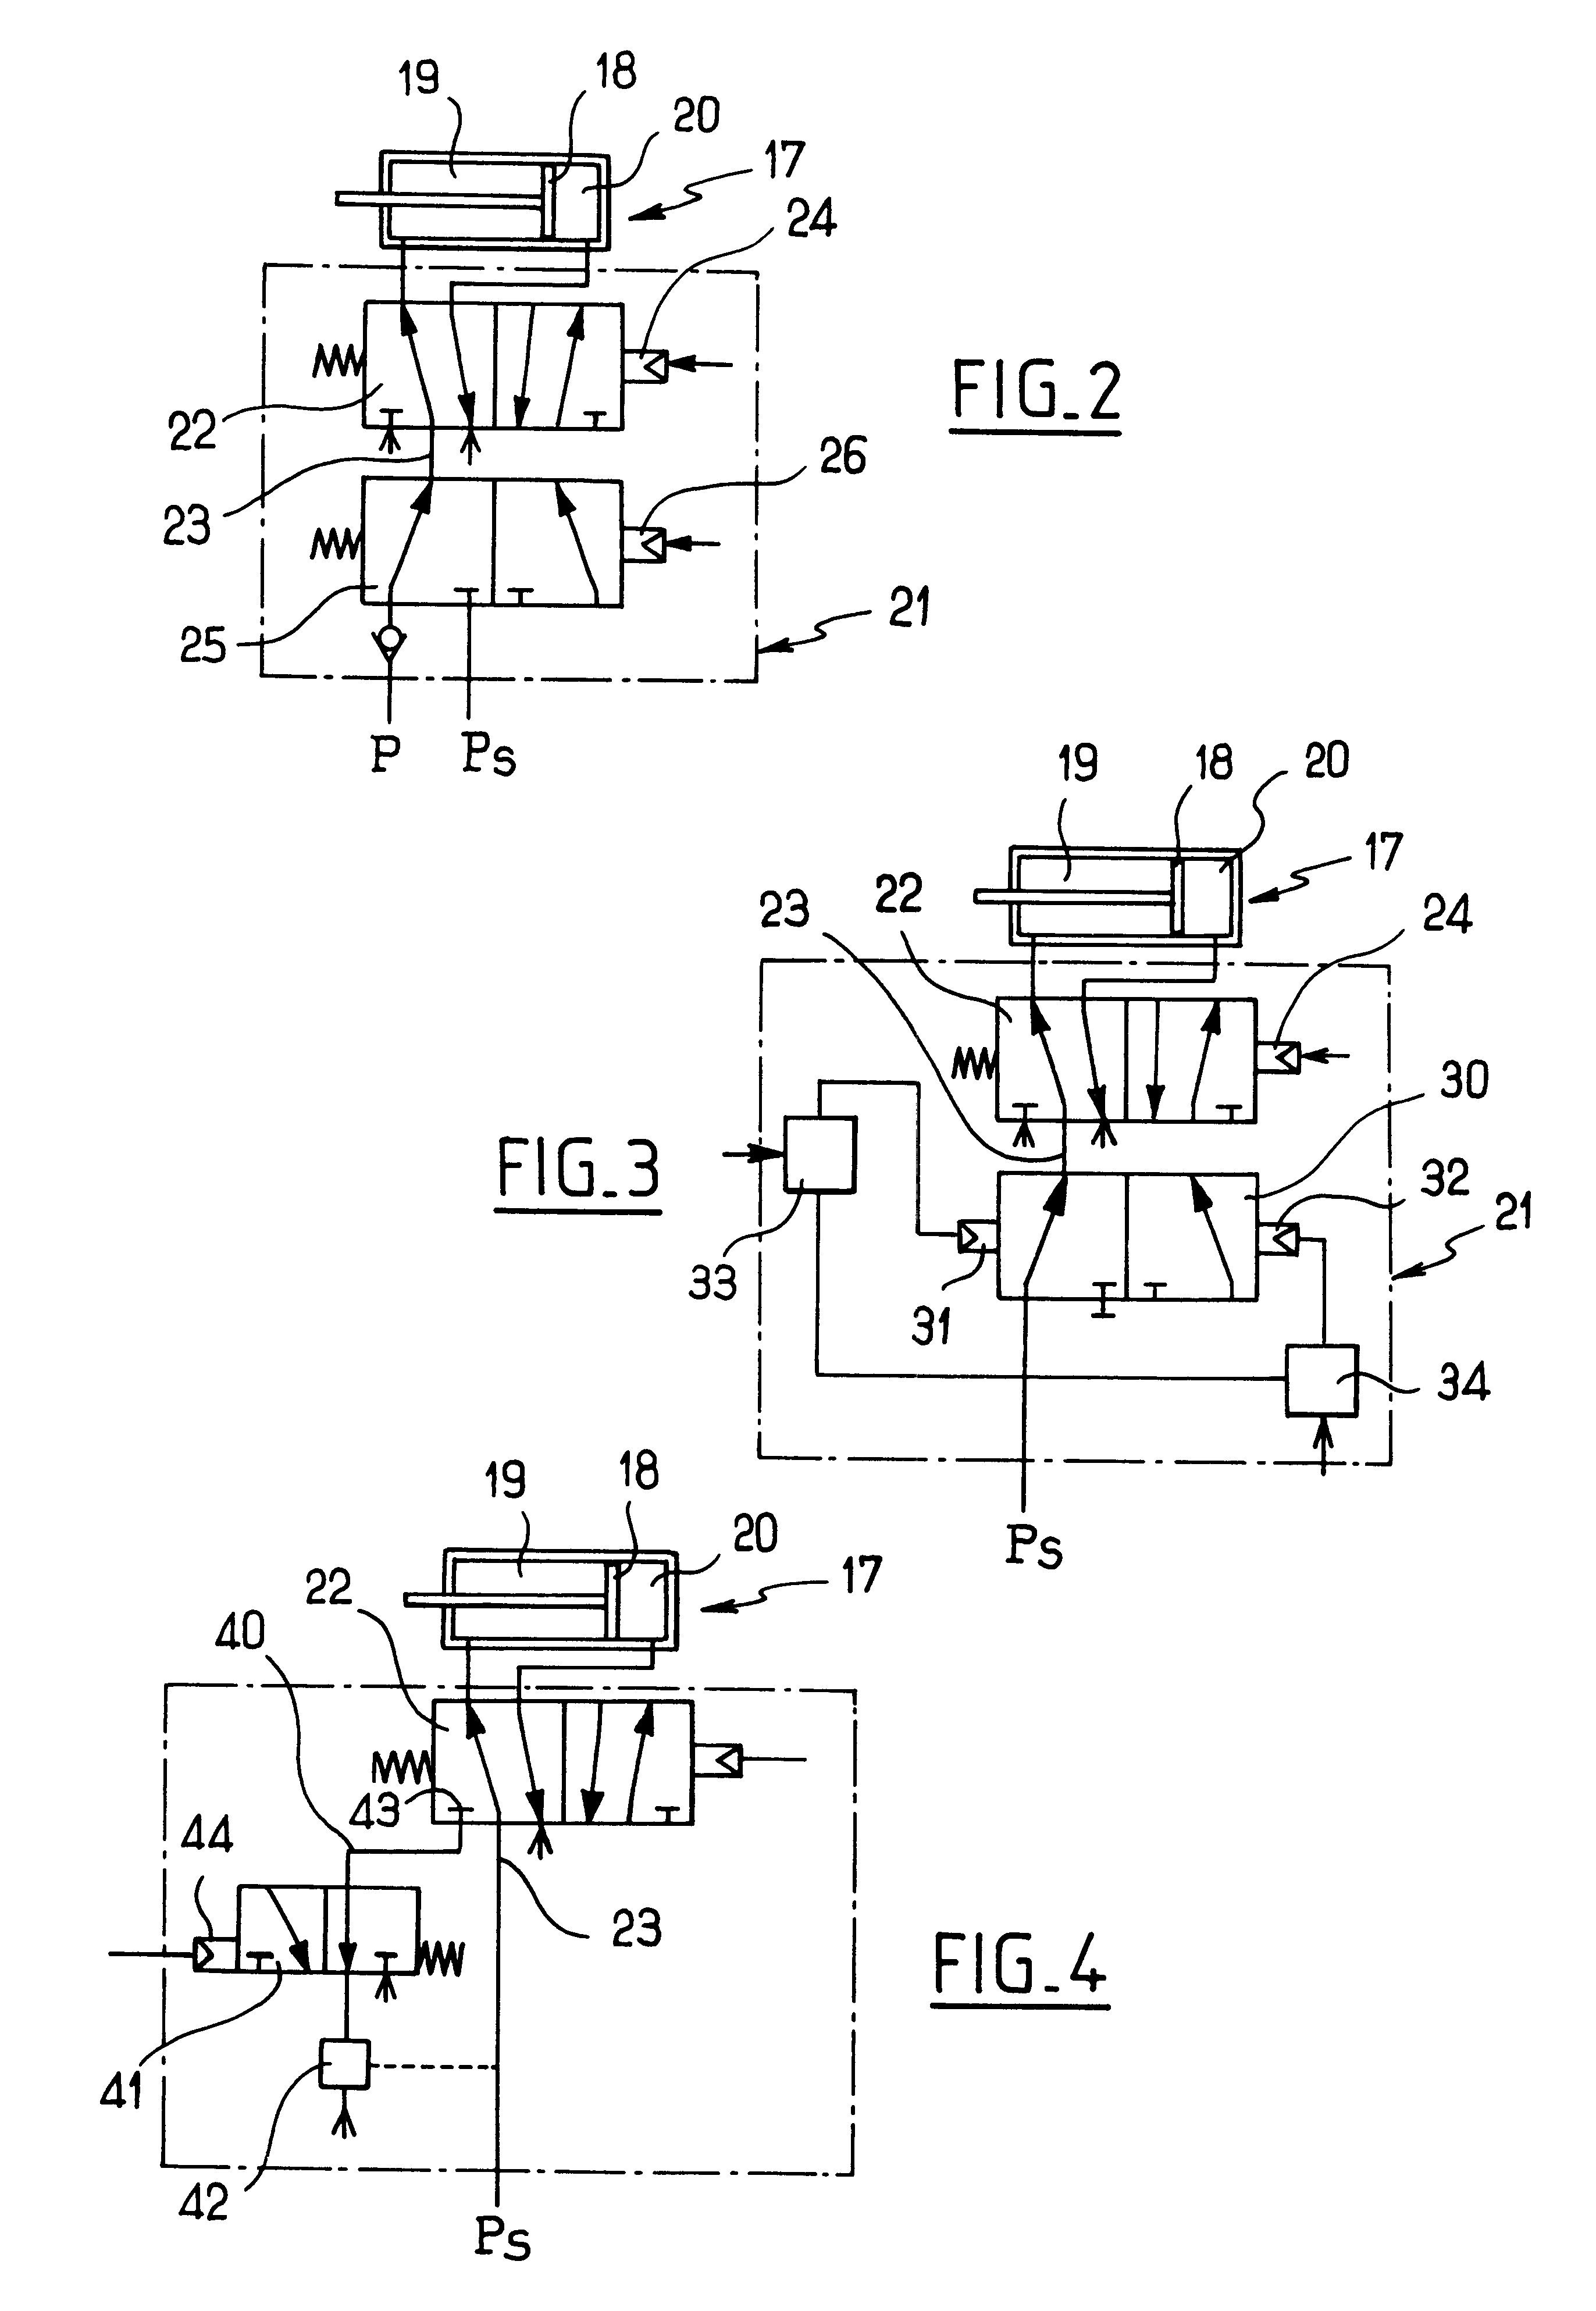 Method of controlling a screwing spindle